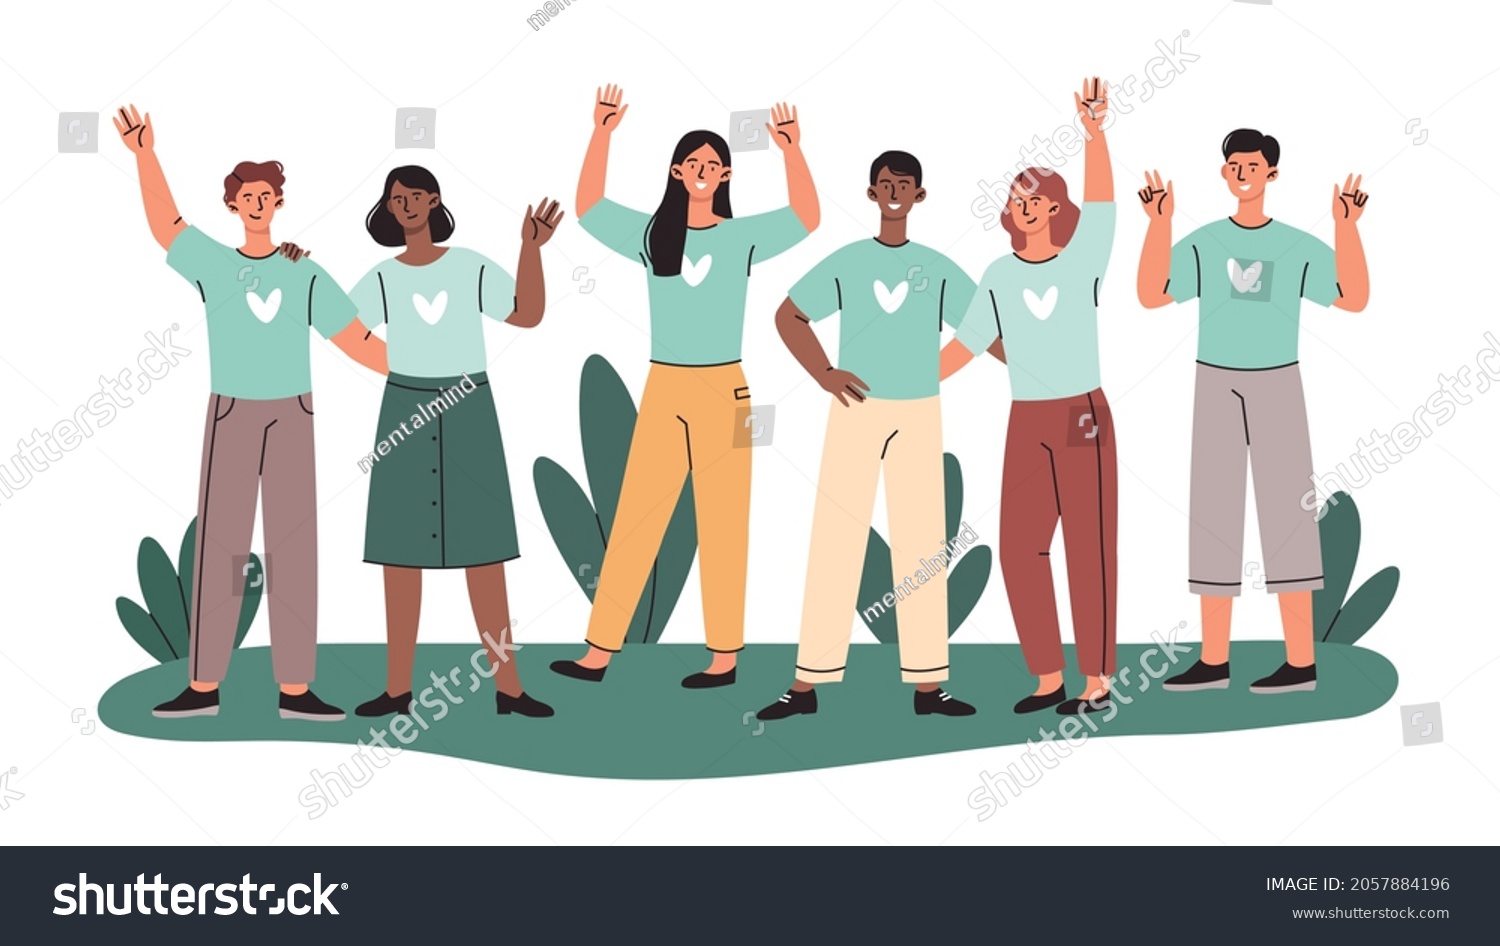 SVG of Group of volunteers. Kind characters stand together, hug and wave their hands. Charity and donations. People help those in need. Cartoon flat vector illustration isolated on white background svg